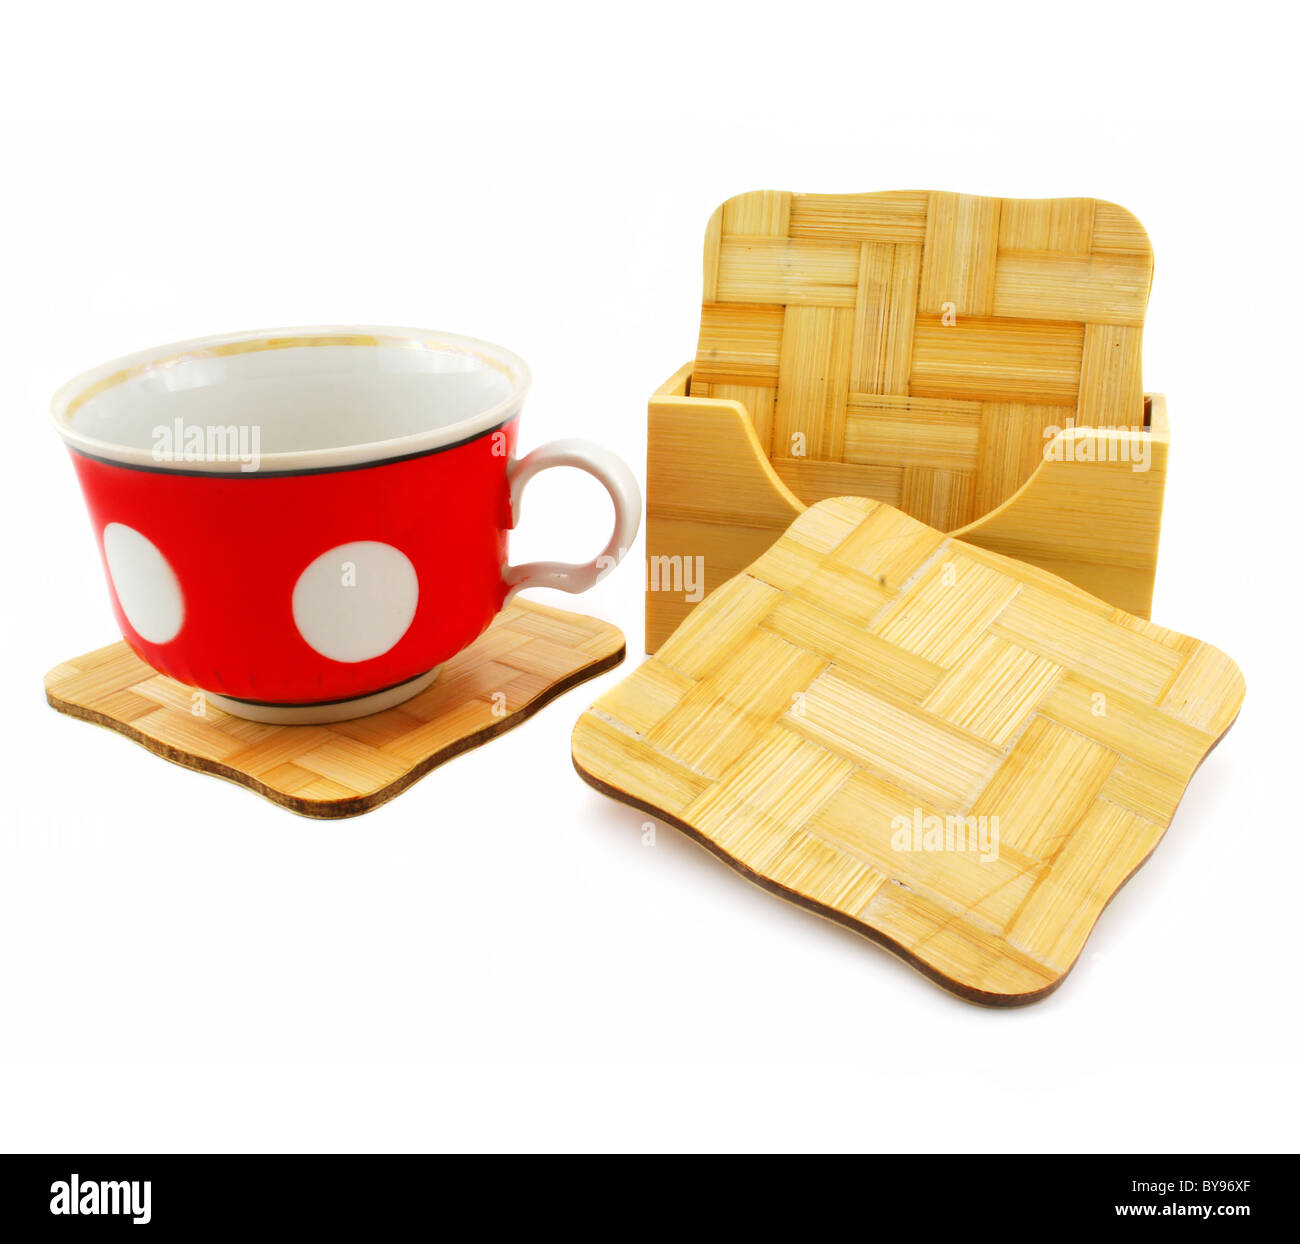 Colored cup and set of wooden trivets Stock Photo